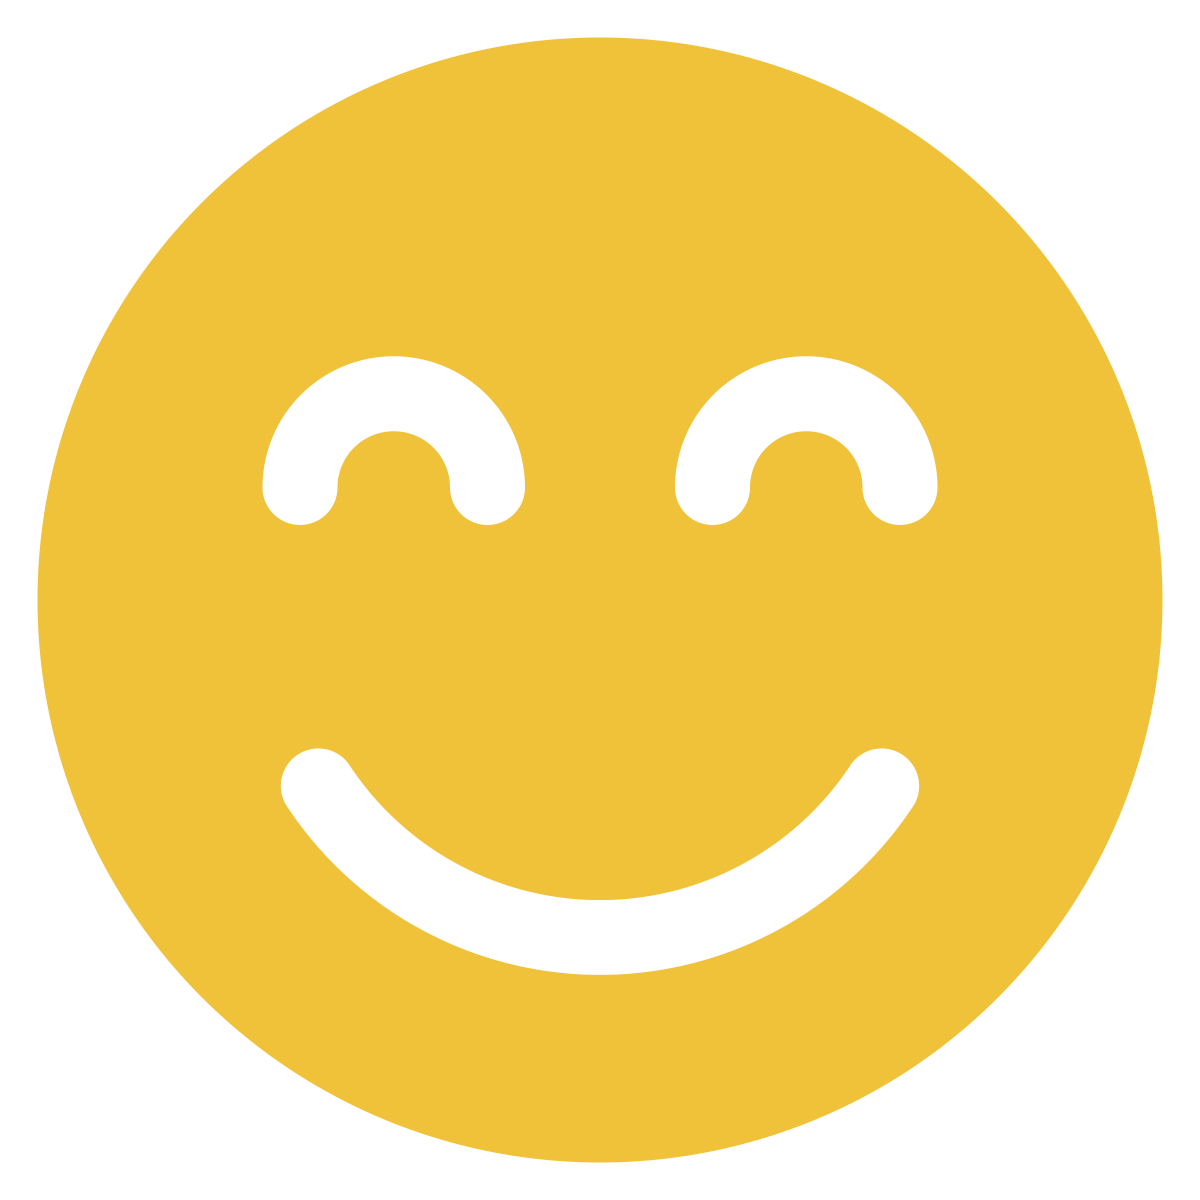 A yellow smiley face with eyes closed.